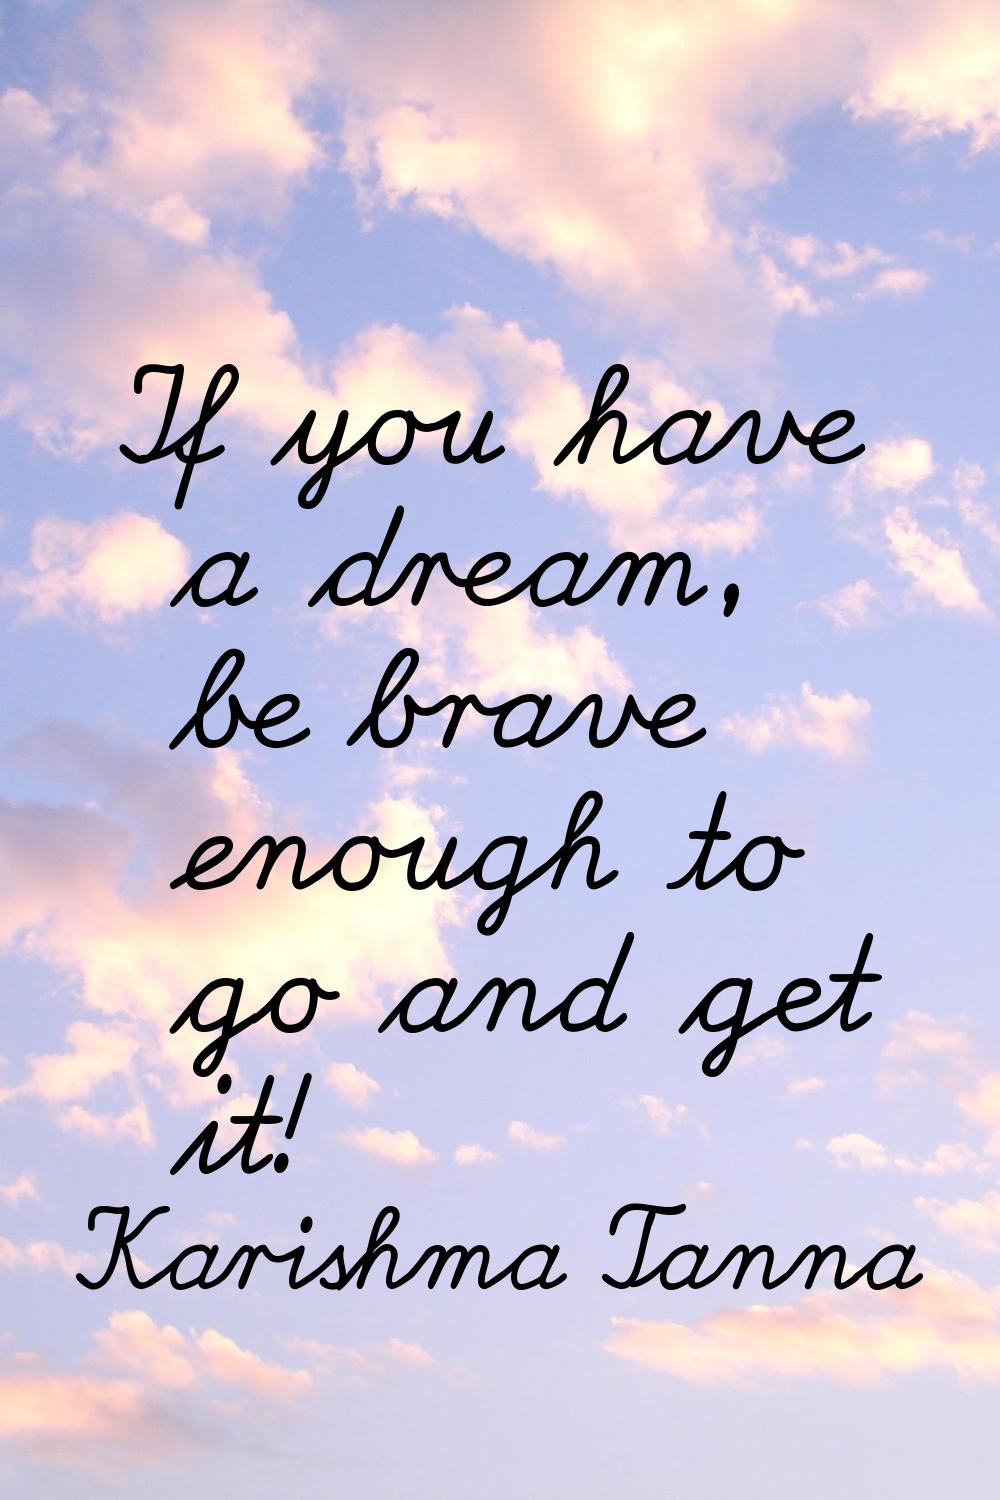 If you have a dream, be brave enough to go and get it!